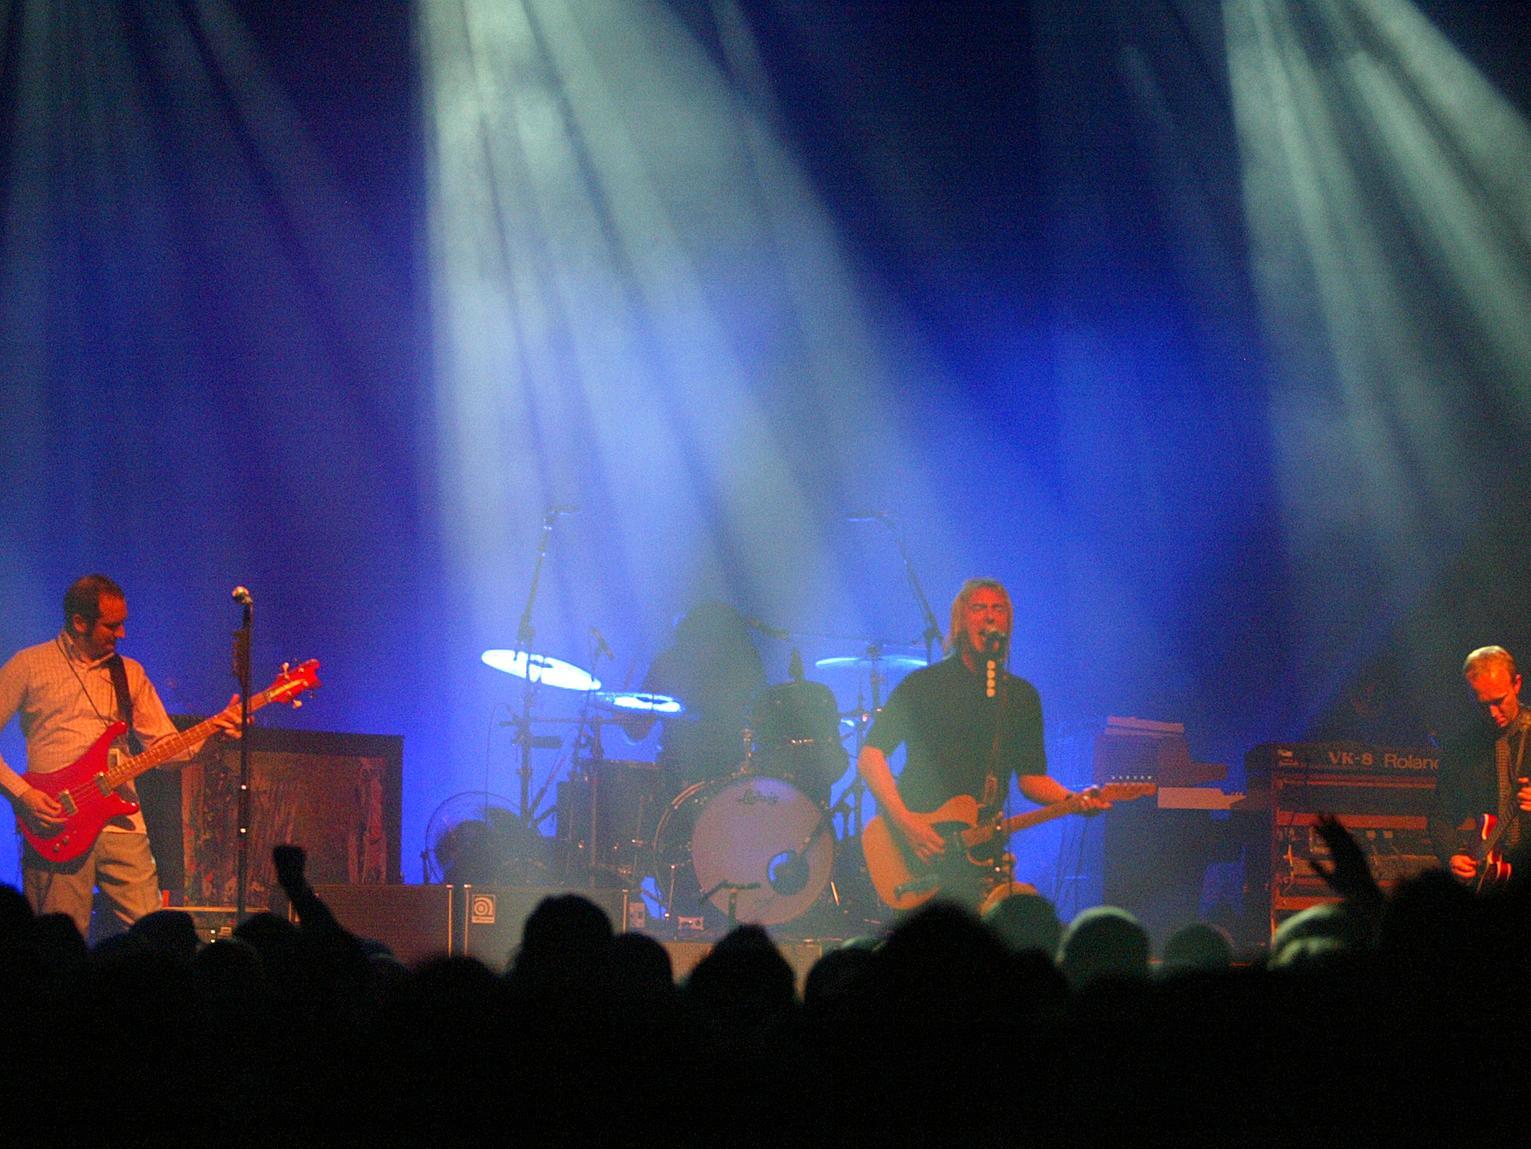 English singer-songwriter and musician Paul Weller took to the stage at The Victoria Theatre in Halifax back in 2008. The singer achieved fame with the punk rock/new wave/mod revival band The Jam.